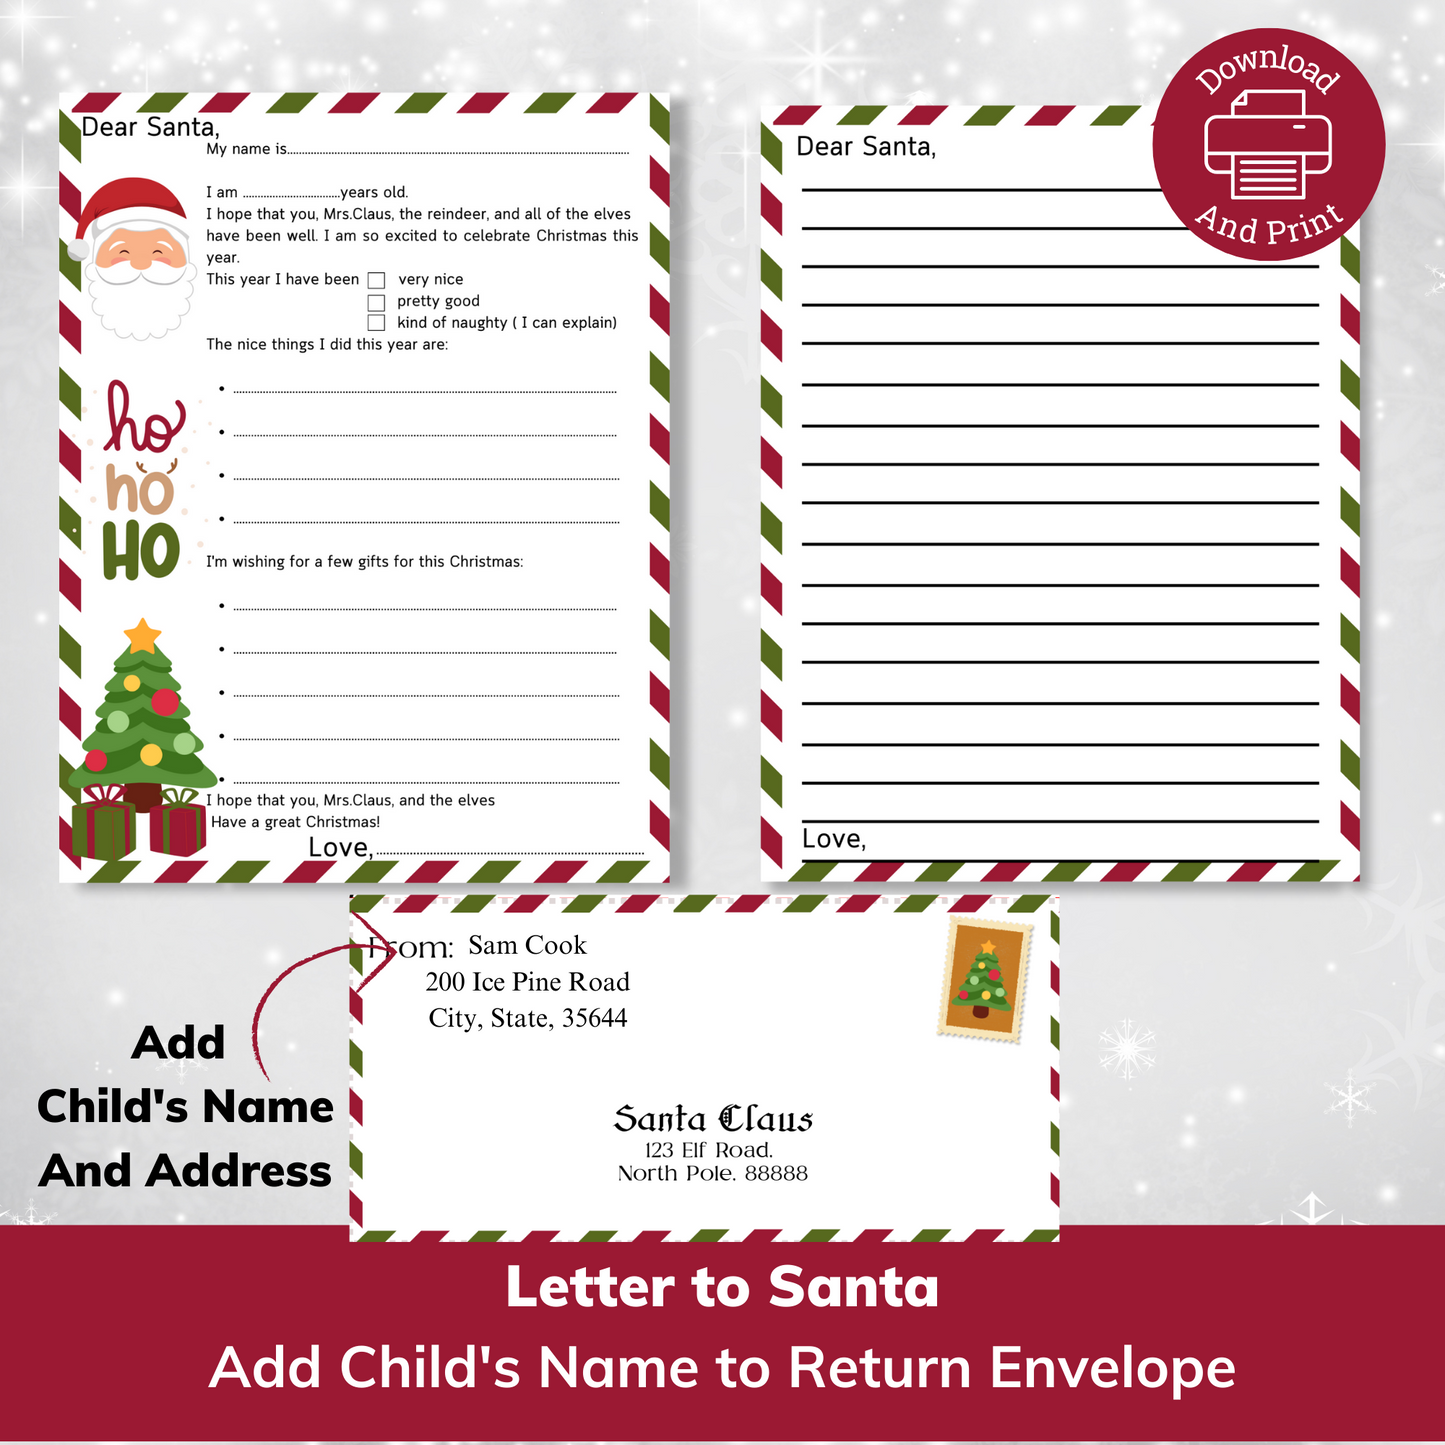 Letters for child to write a letter to santa. And an envelope to send letter back to santa